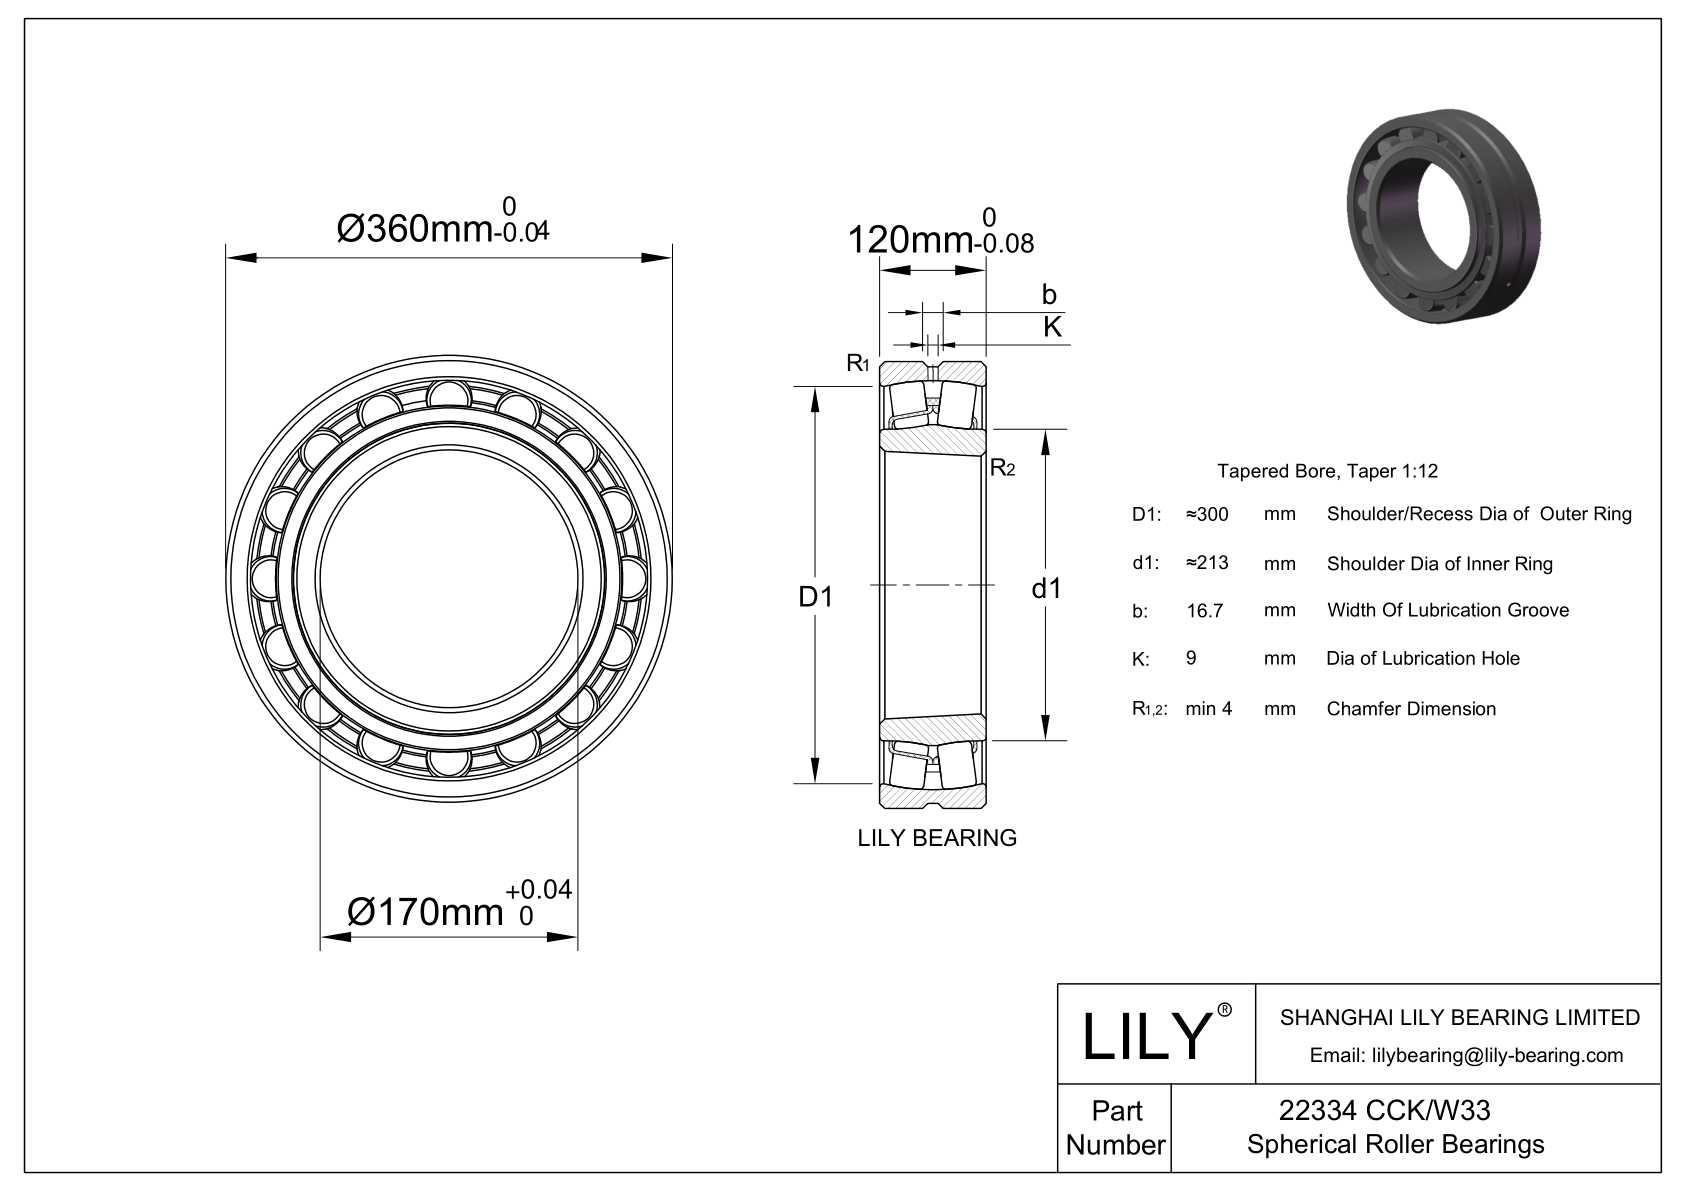 22334 CCK/W33 Double Row Spherical Roller Bearing cad drawing